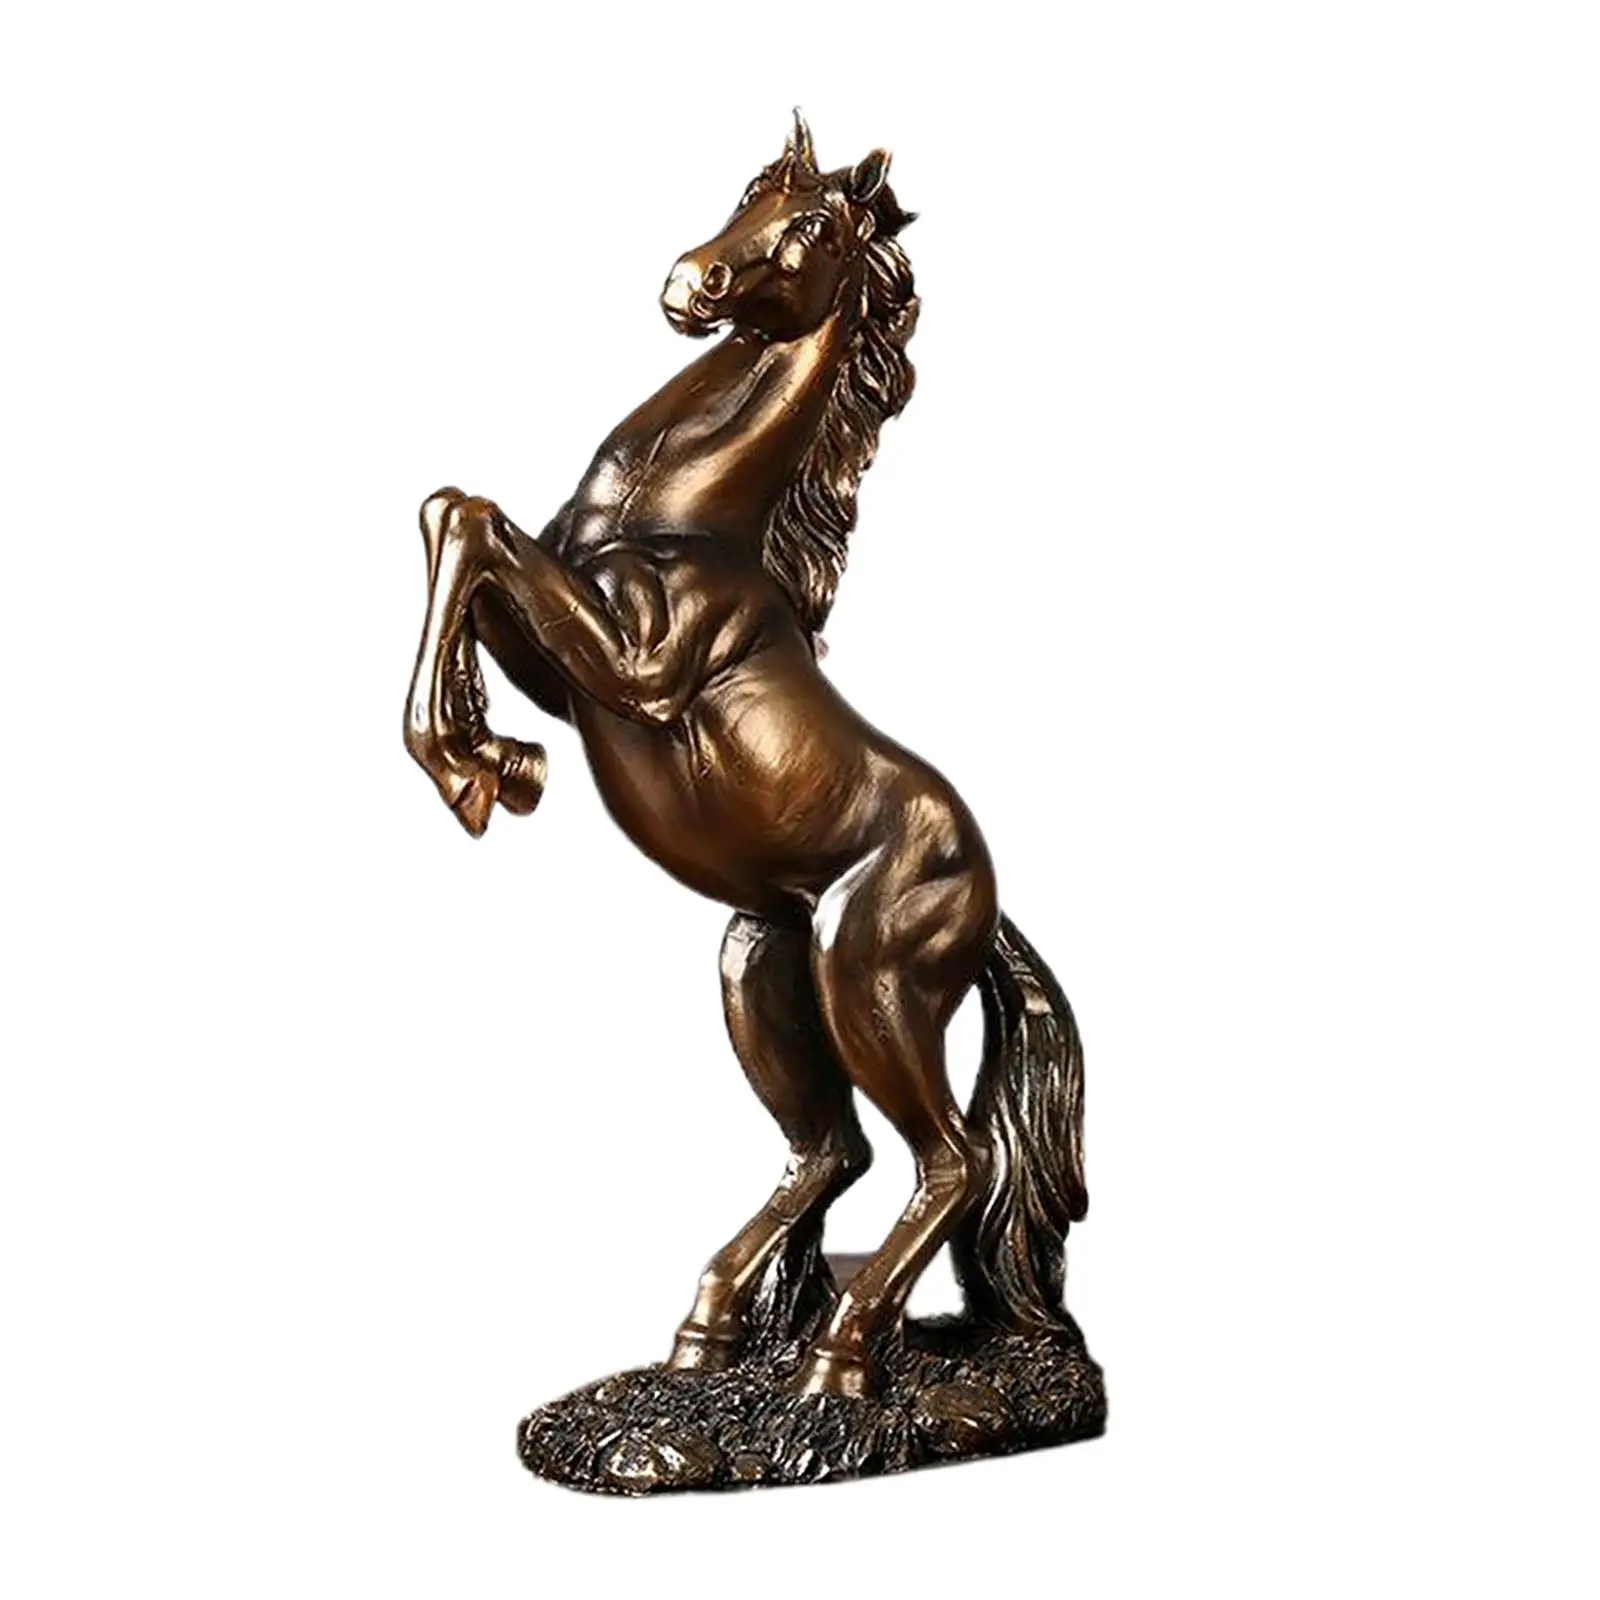 Nordic Style Resin War Horse Statue Running Horse Sculpture Animal Figure Home